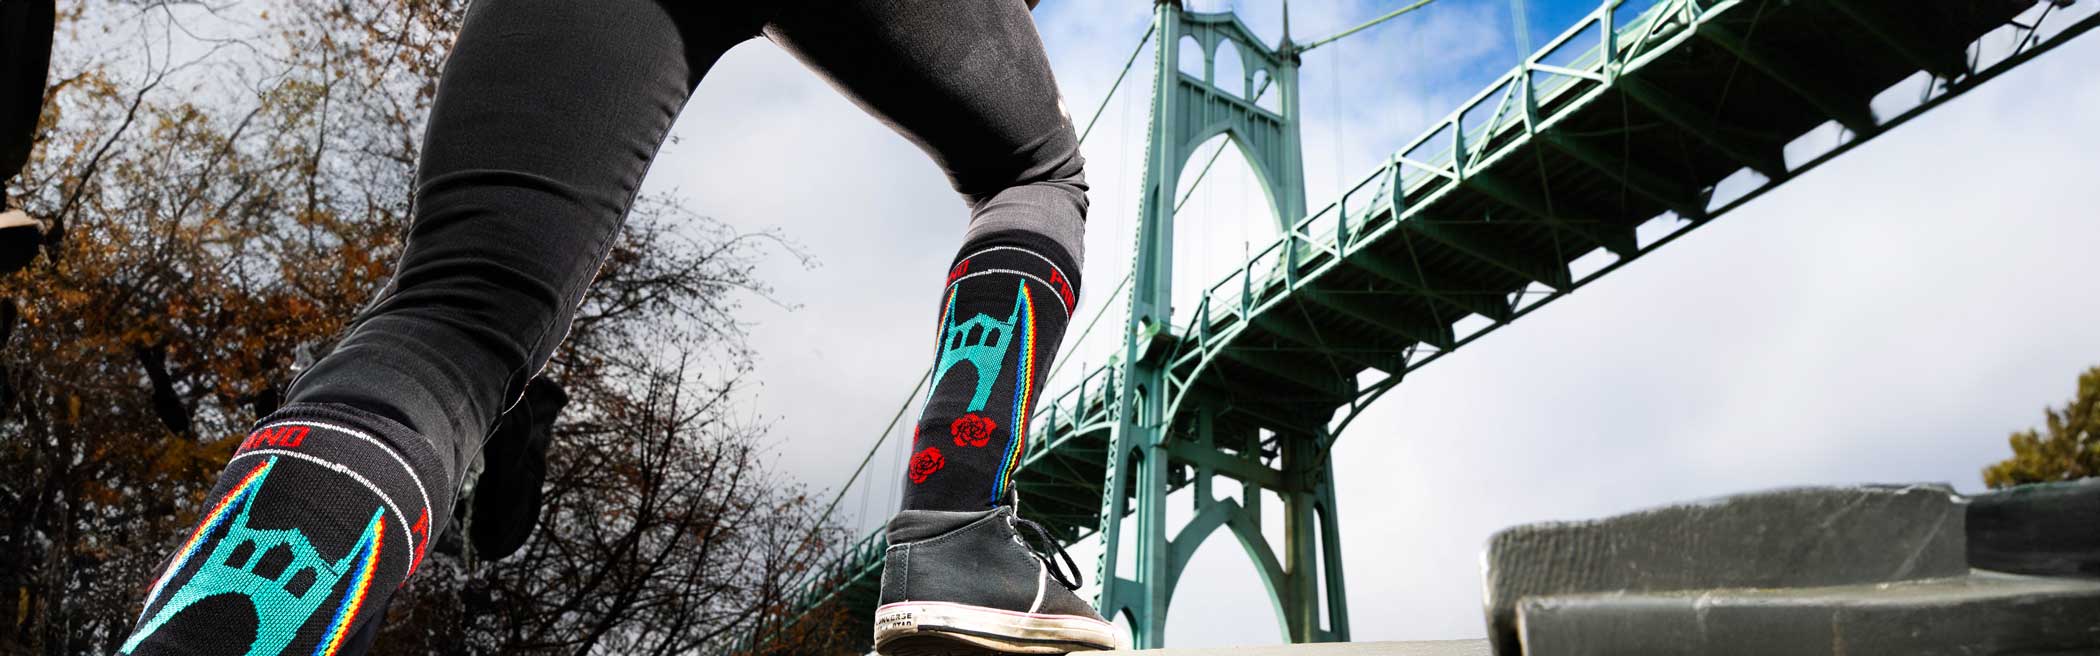 Socks on person in front of St Johns Bridge